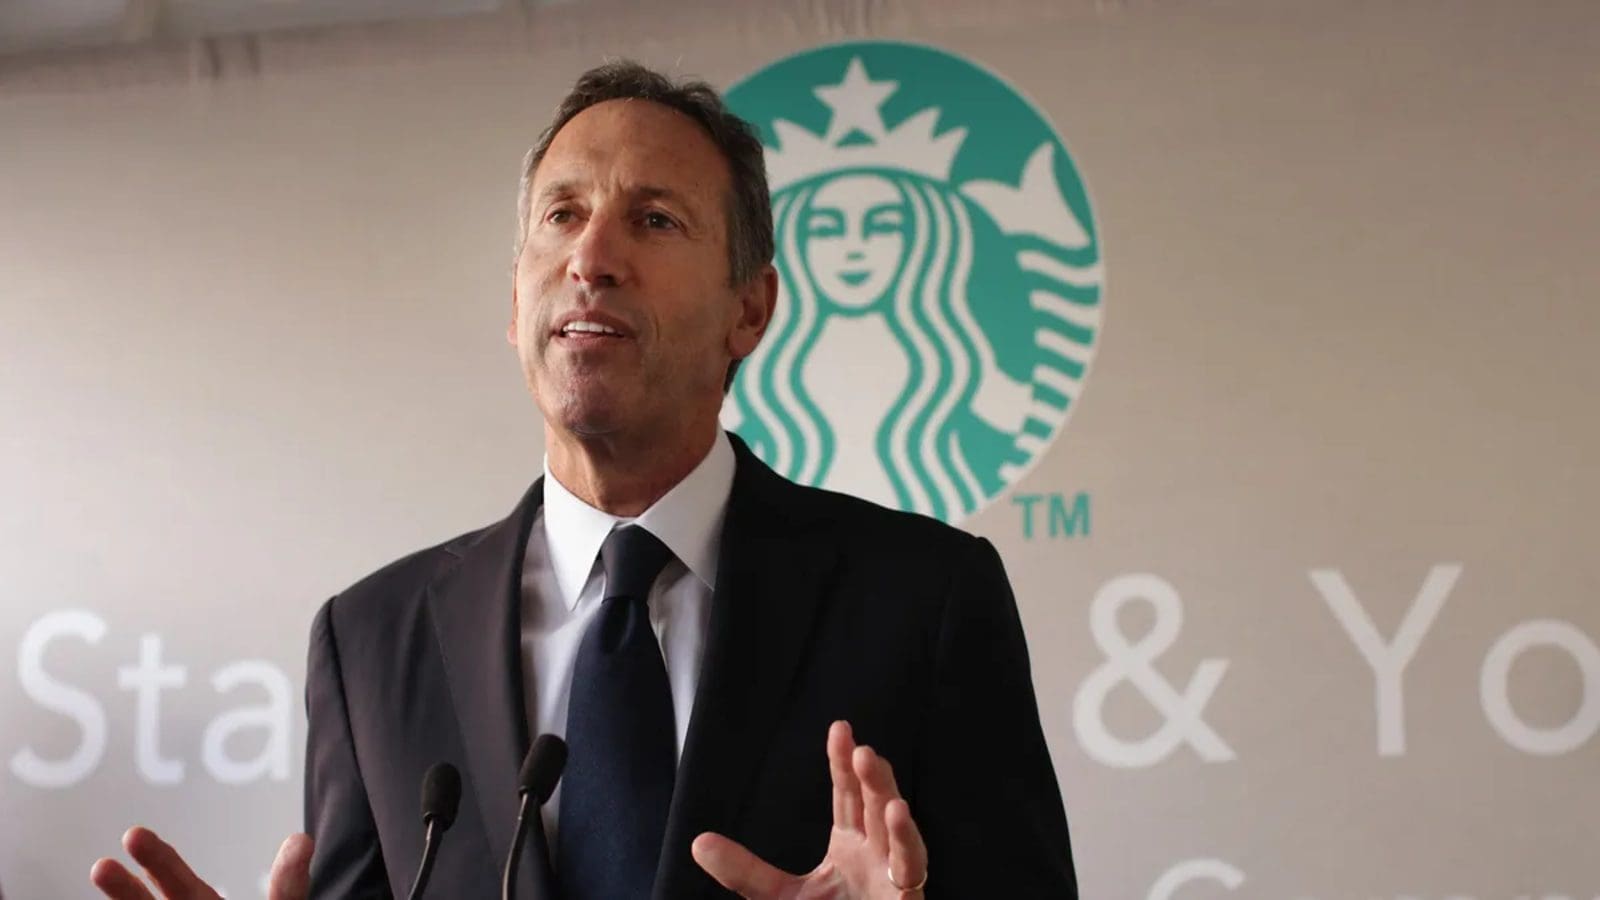 Howard Schultz returns to Starbucks as Interim CEO following departure of Kevin Johnson 